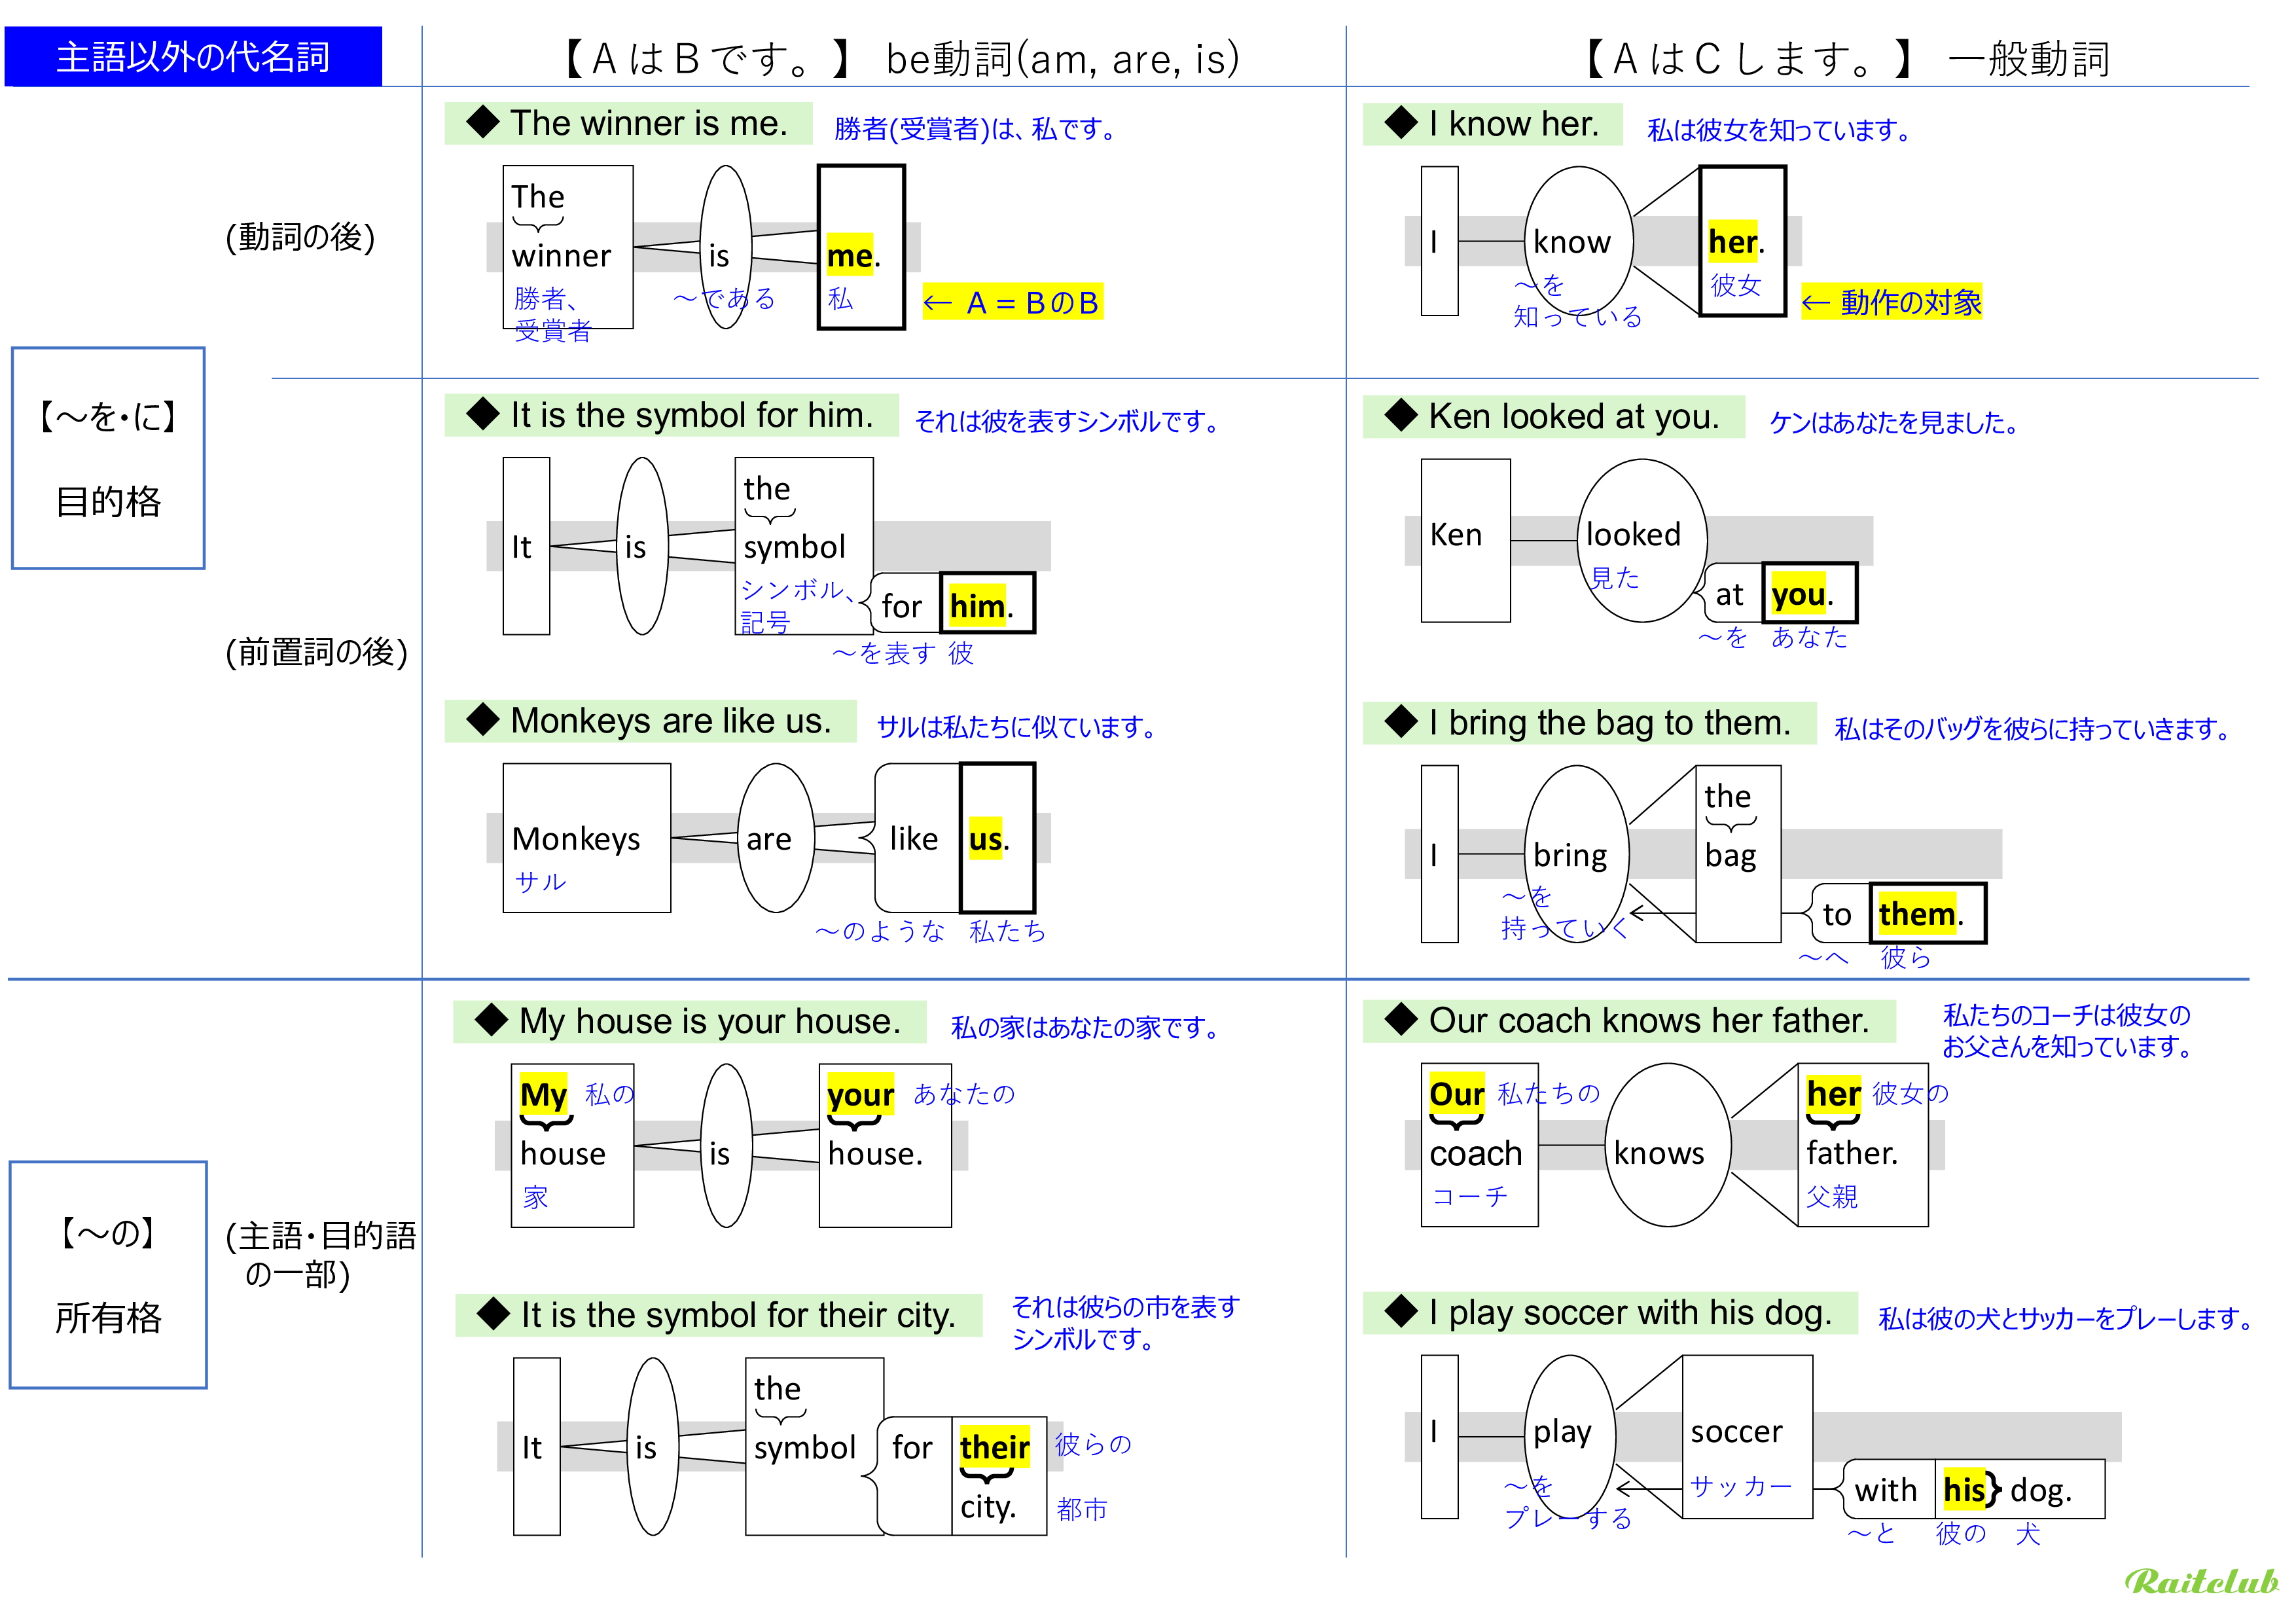 Example images of sentence structure diagrams for understanding pronoun use